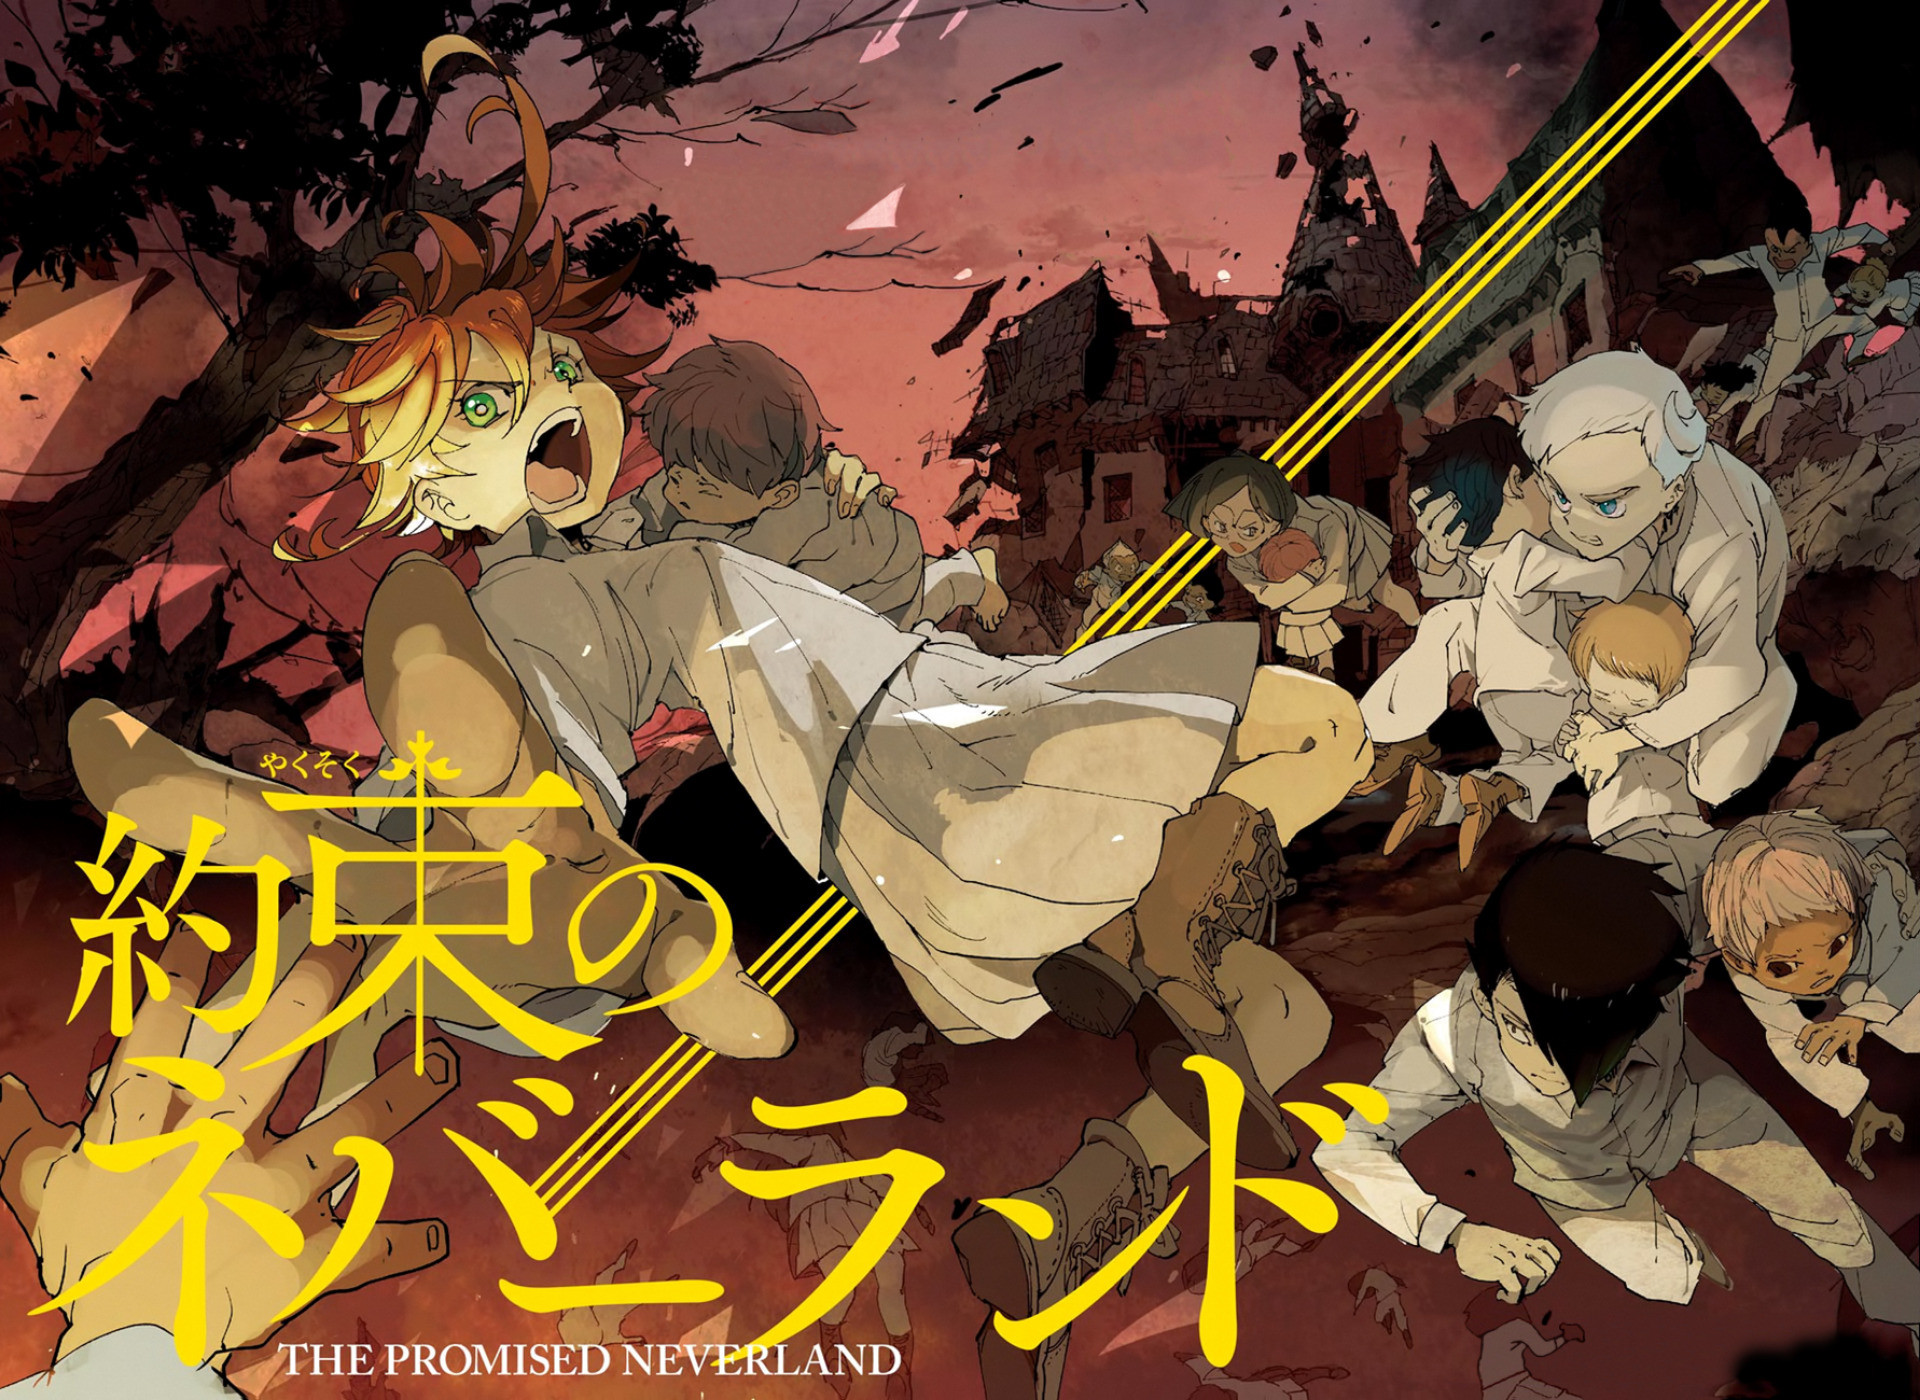 1920x1400 The Promised Neverland HD Wallpaper | Hintergrund |  | ID:945736 -  Wallpaper Abyss